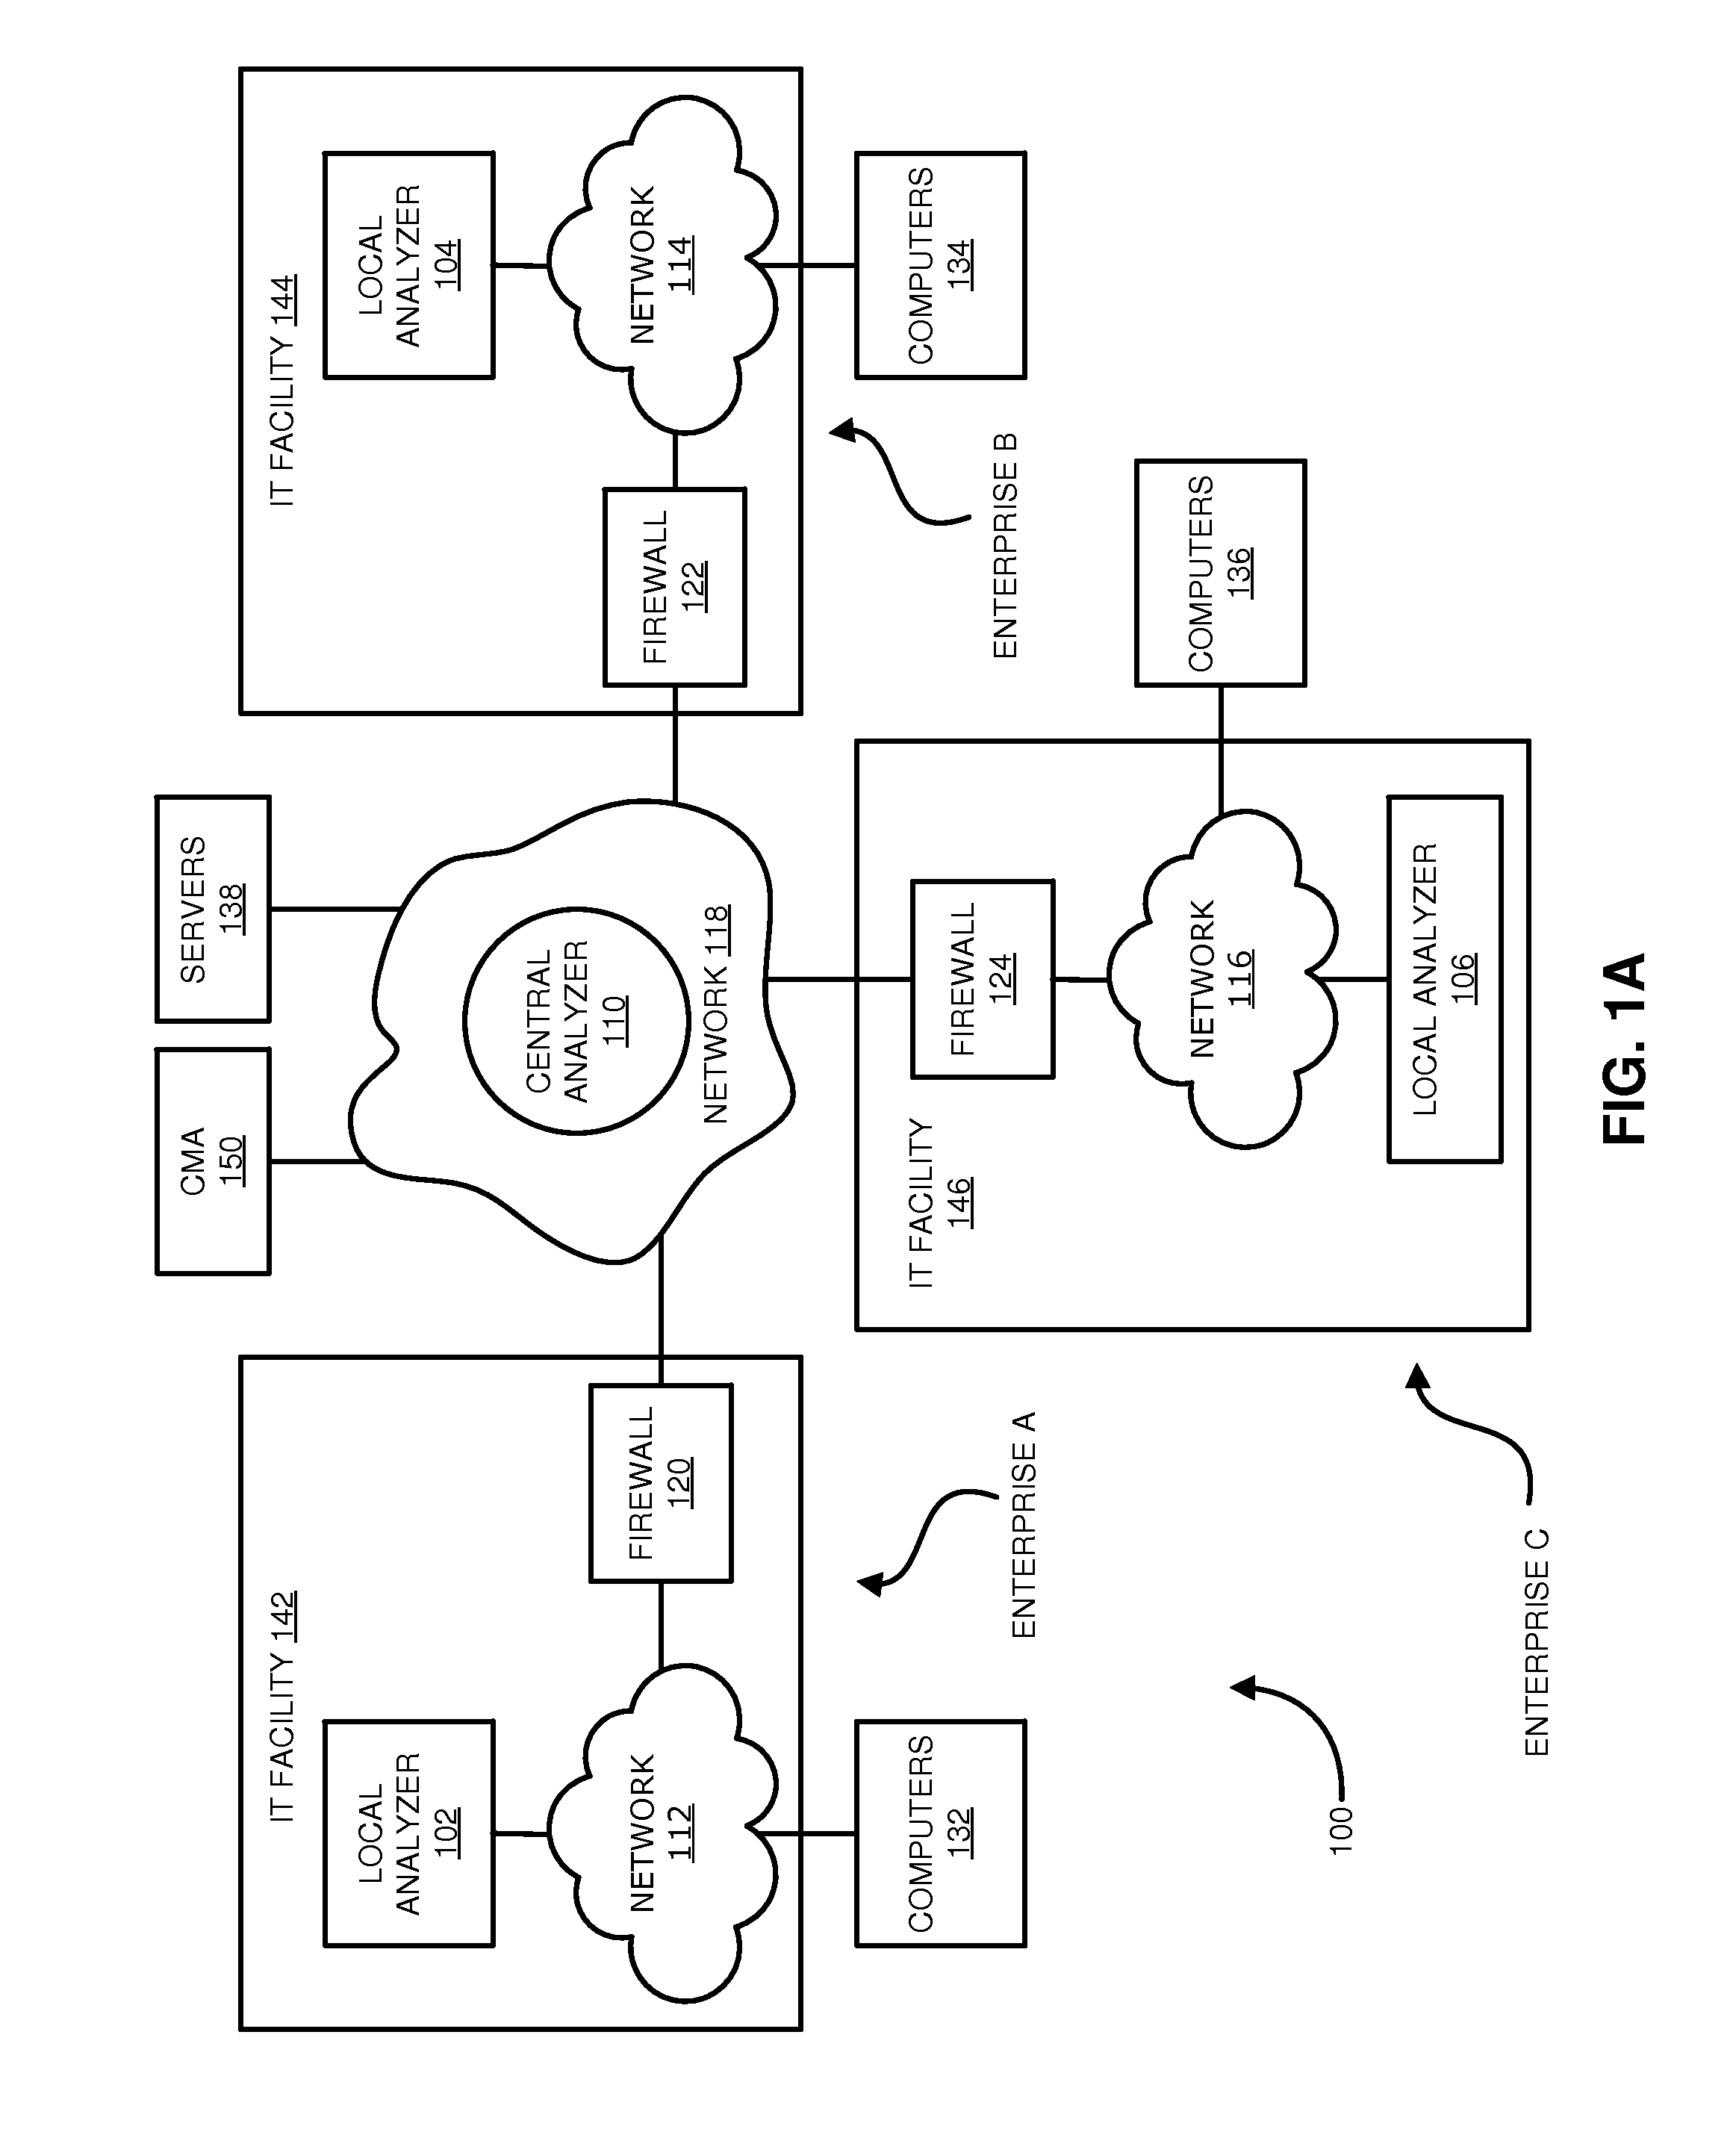 Distributed systems and methods for automatically detecting unknown bots and botnets